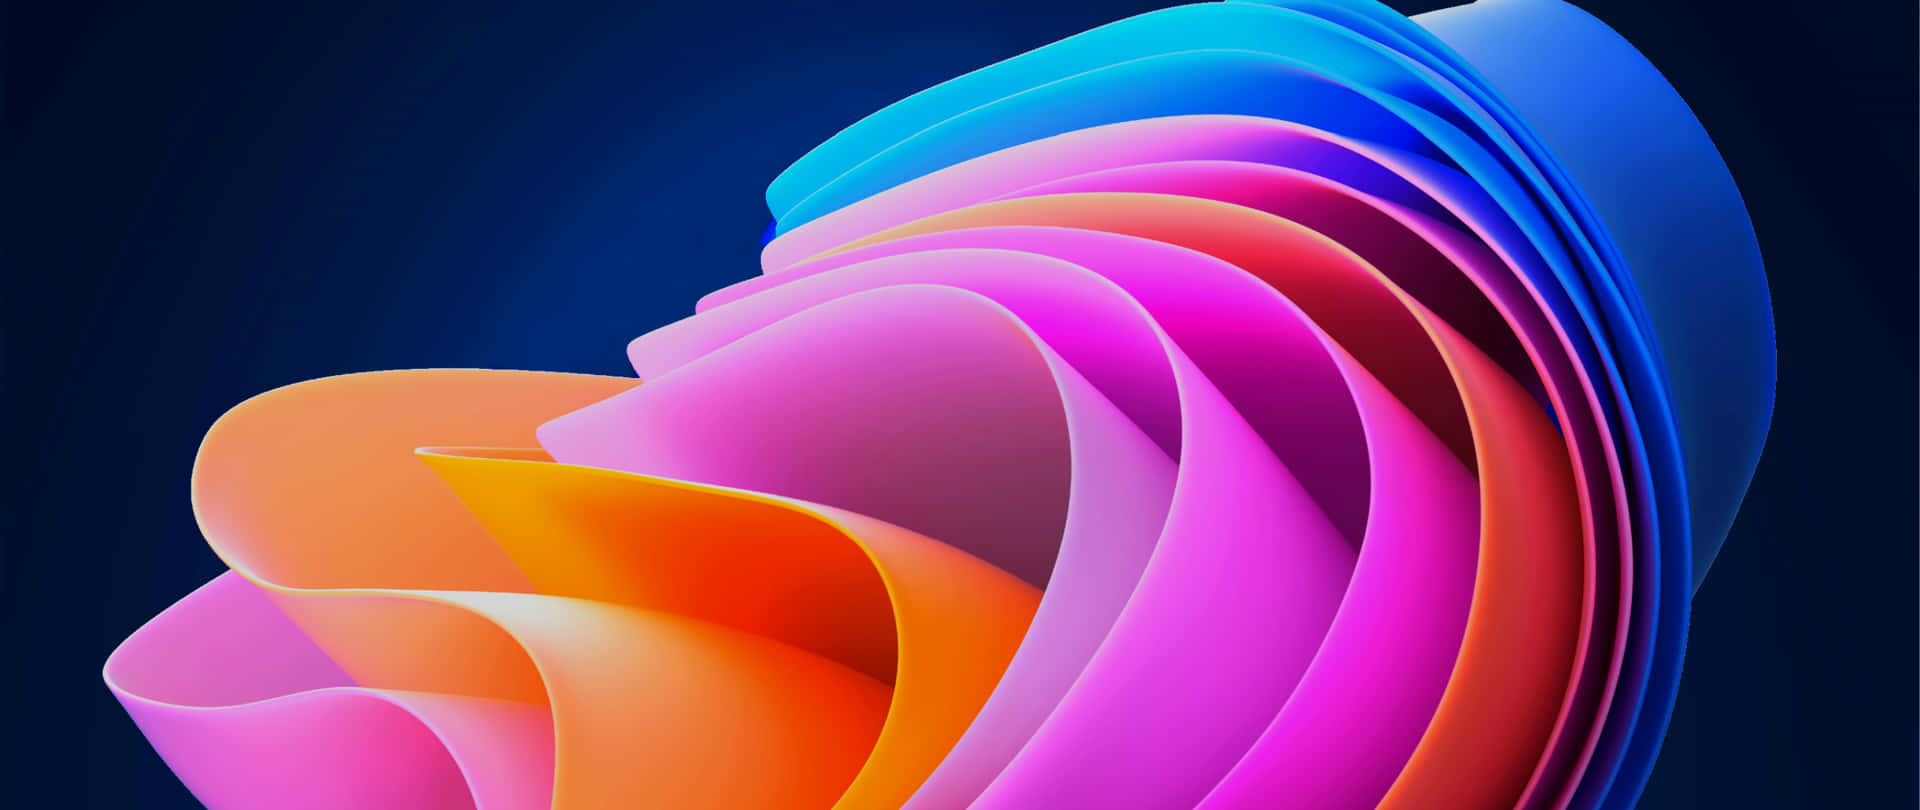 “Colorful Abstract Design” Wallpaper